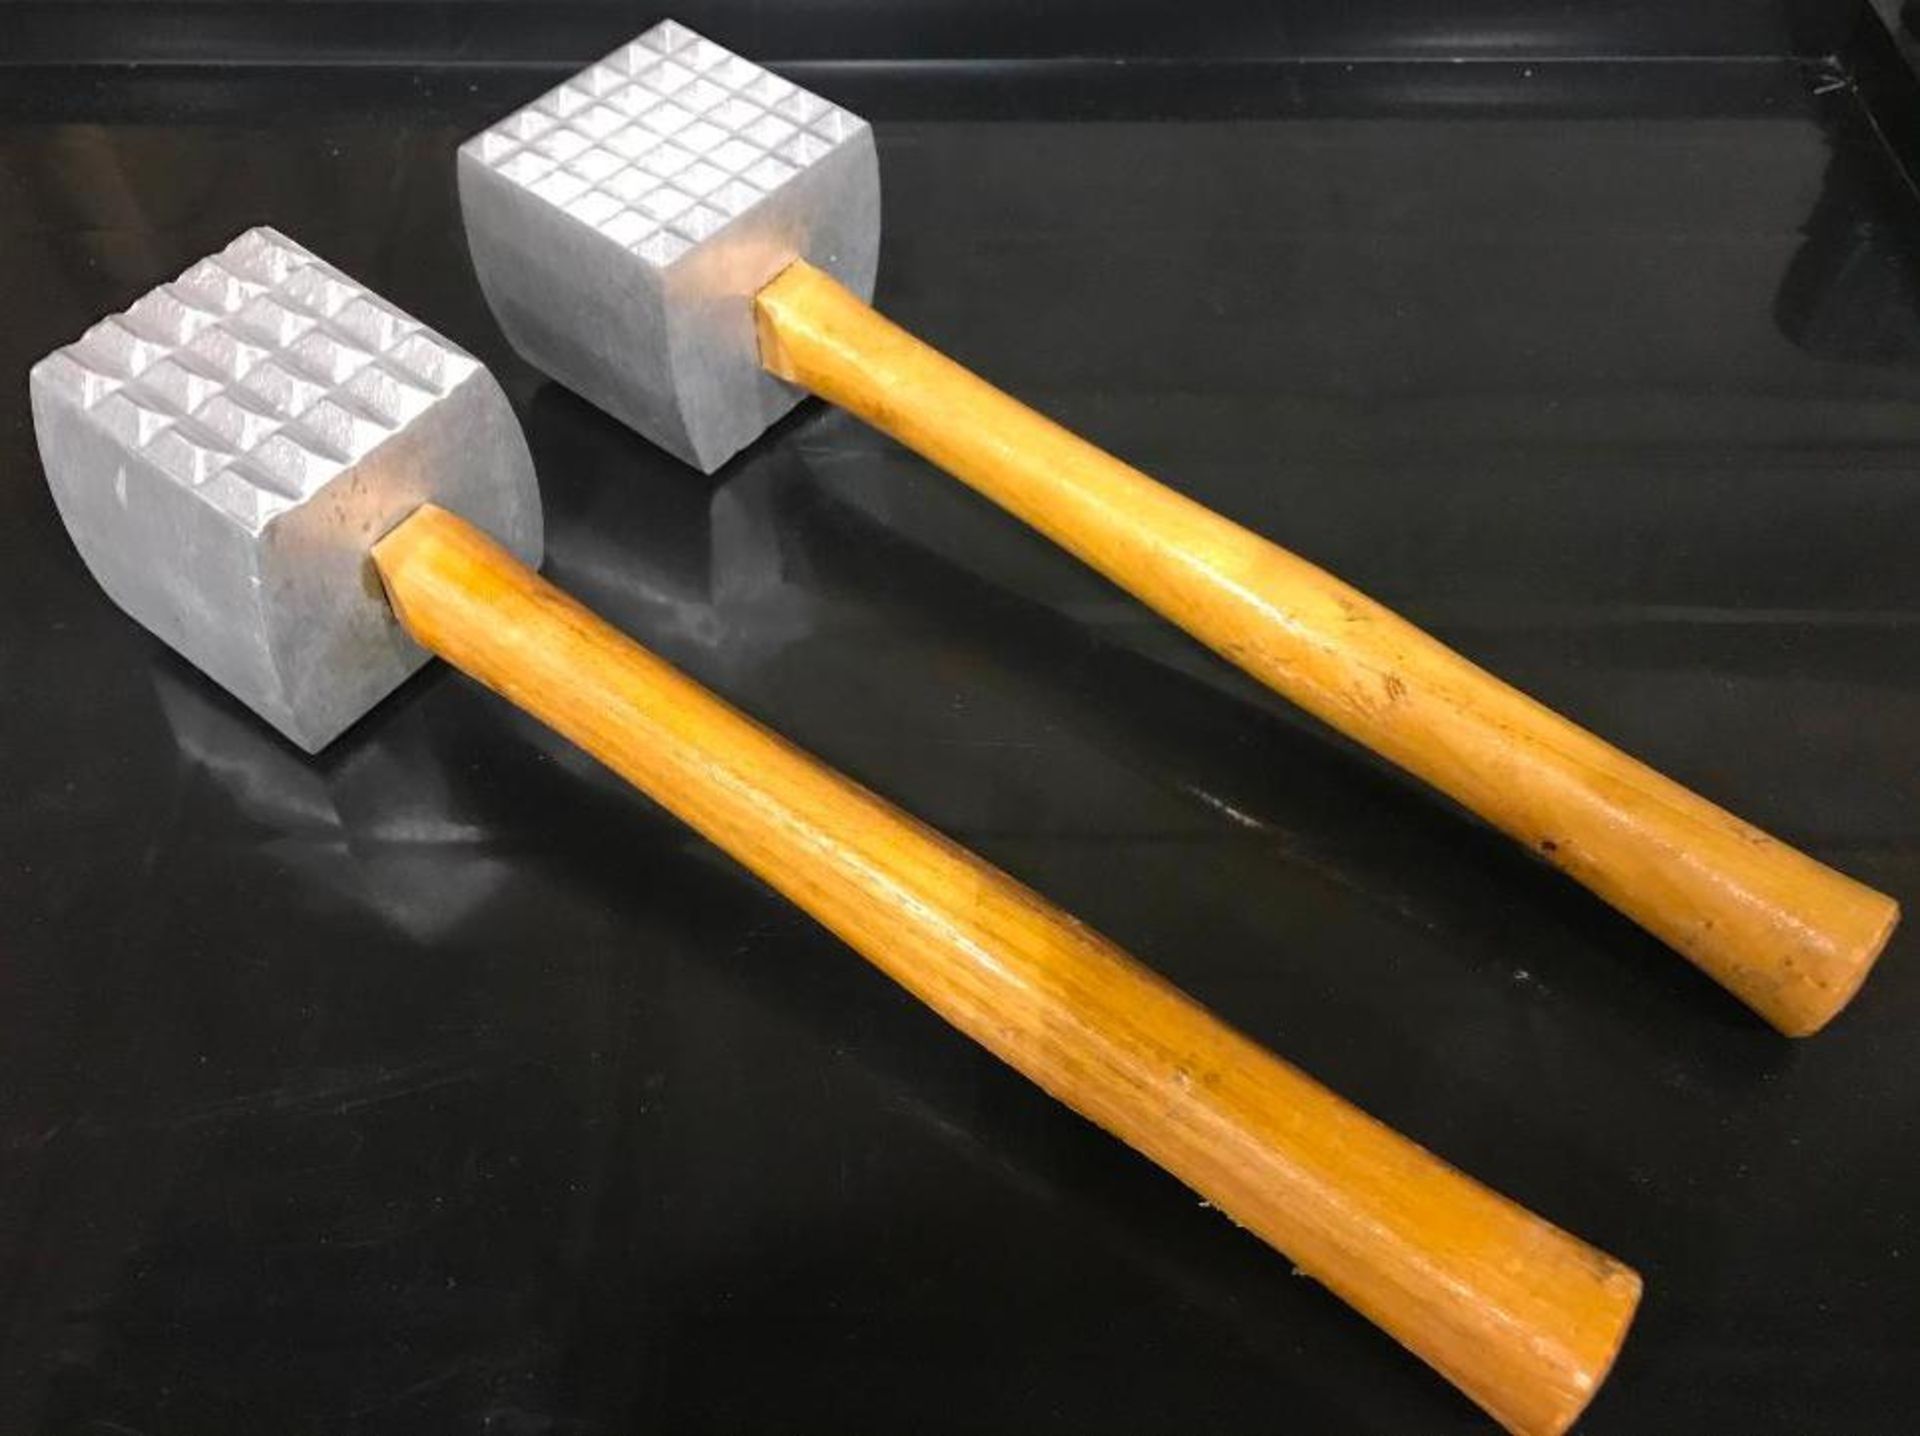 2.75" ALUMINUM MEAT TENDERIZER, WOODEN HANDLE, 11 " LONG, JOHNSON ROSE 3005 - LOT OF 2 - NEW - Image 3 of 3